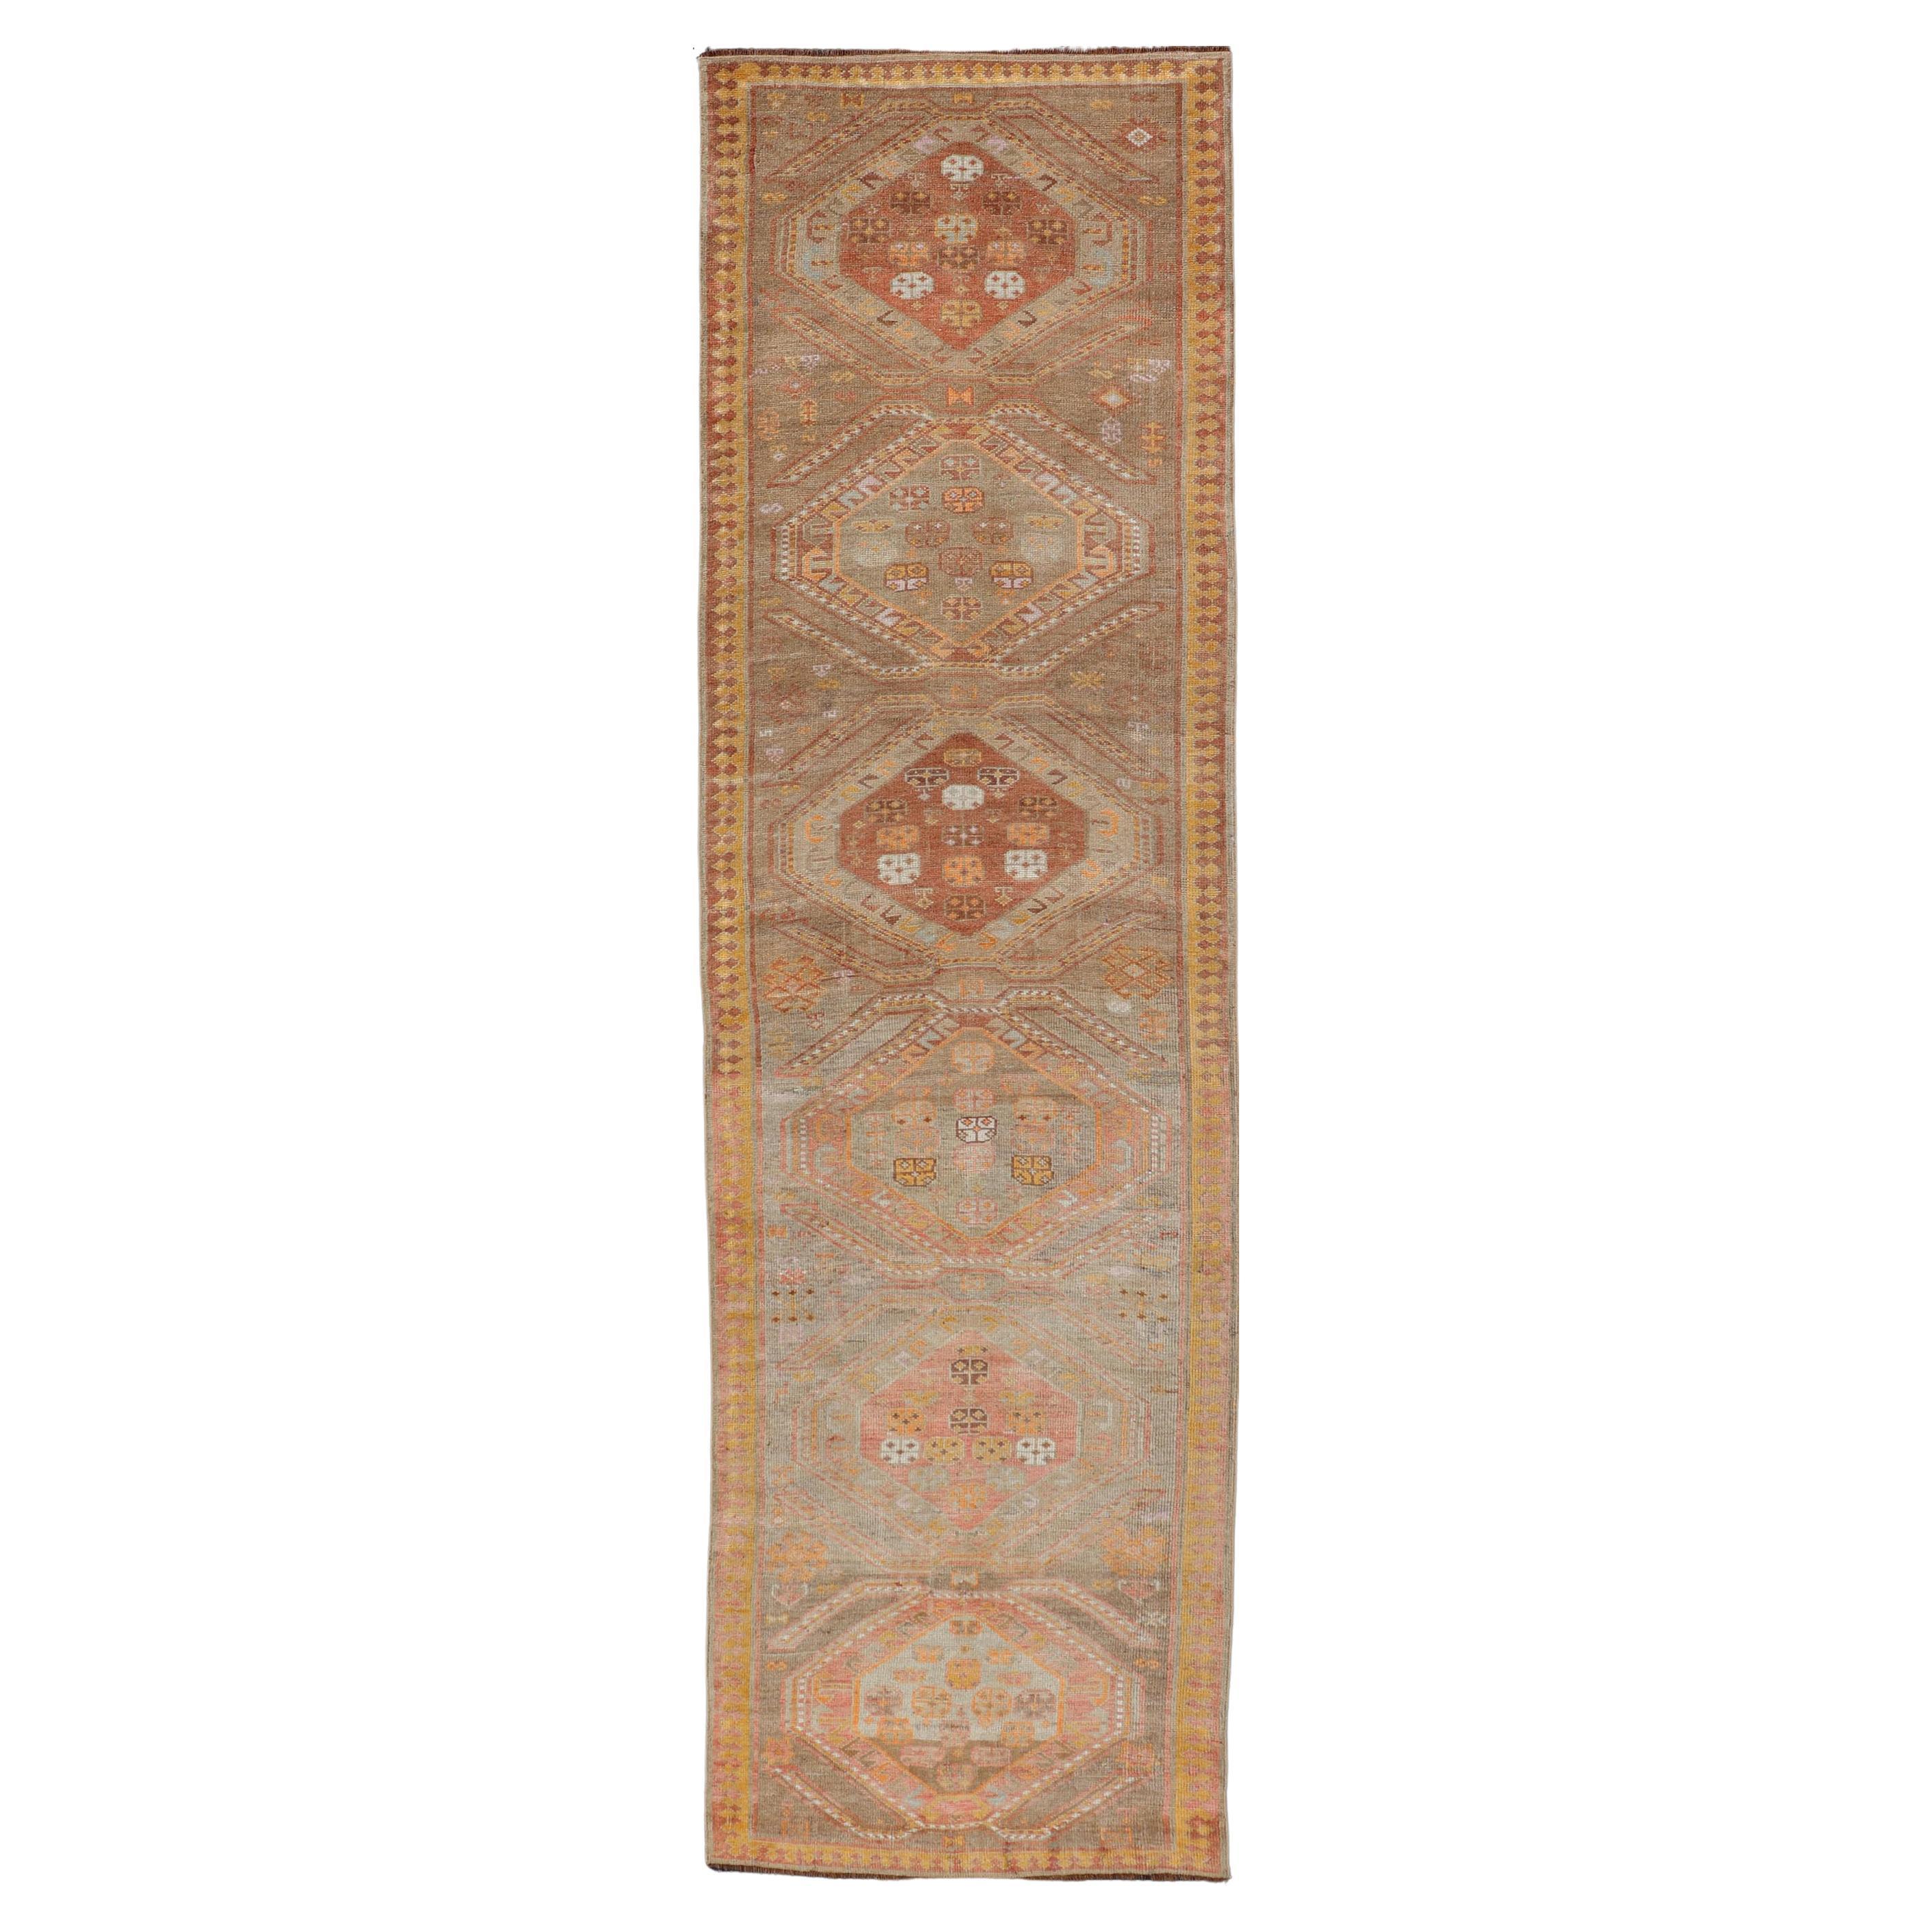 Vintage Turkish Oushak Runner with Tribal Medallions in Brown's, Yellow, and Red